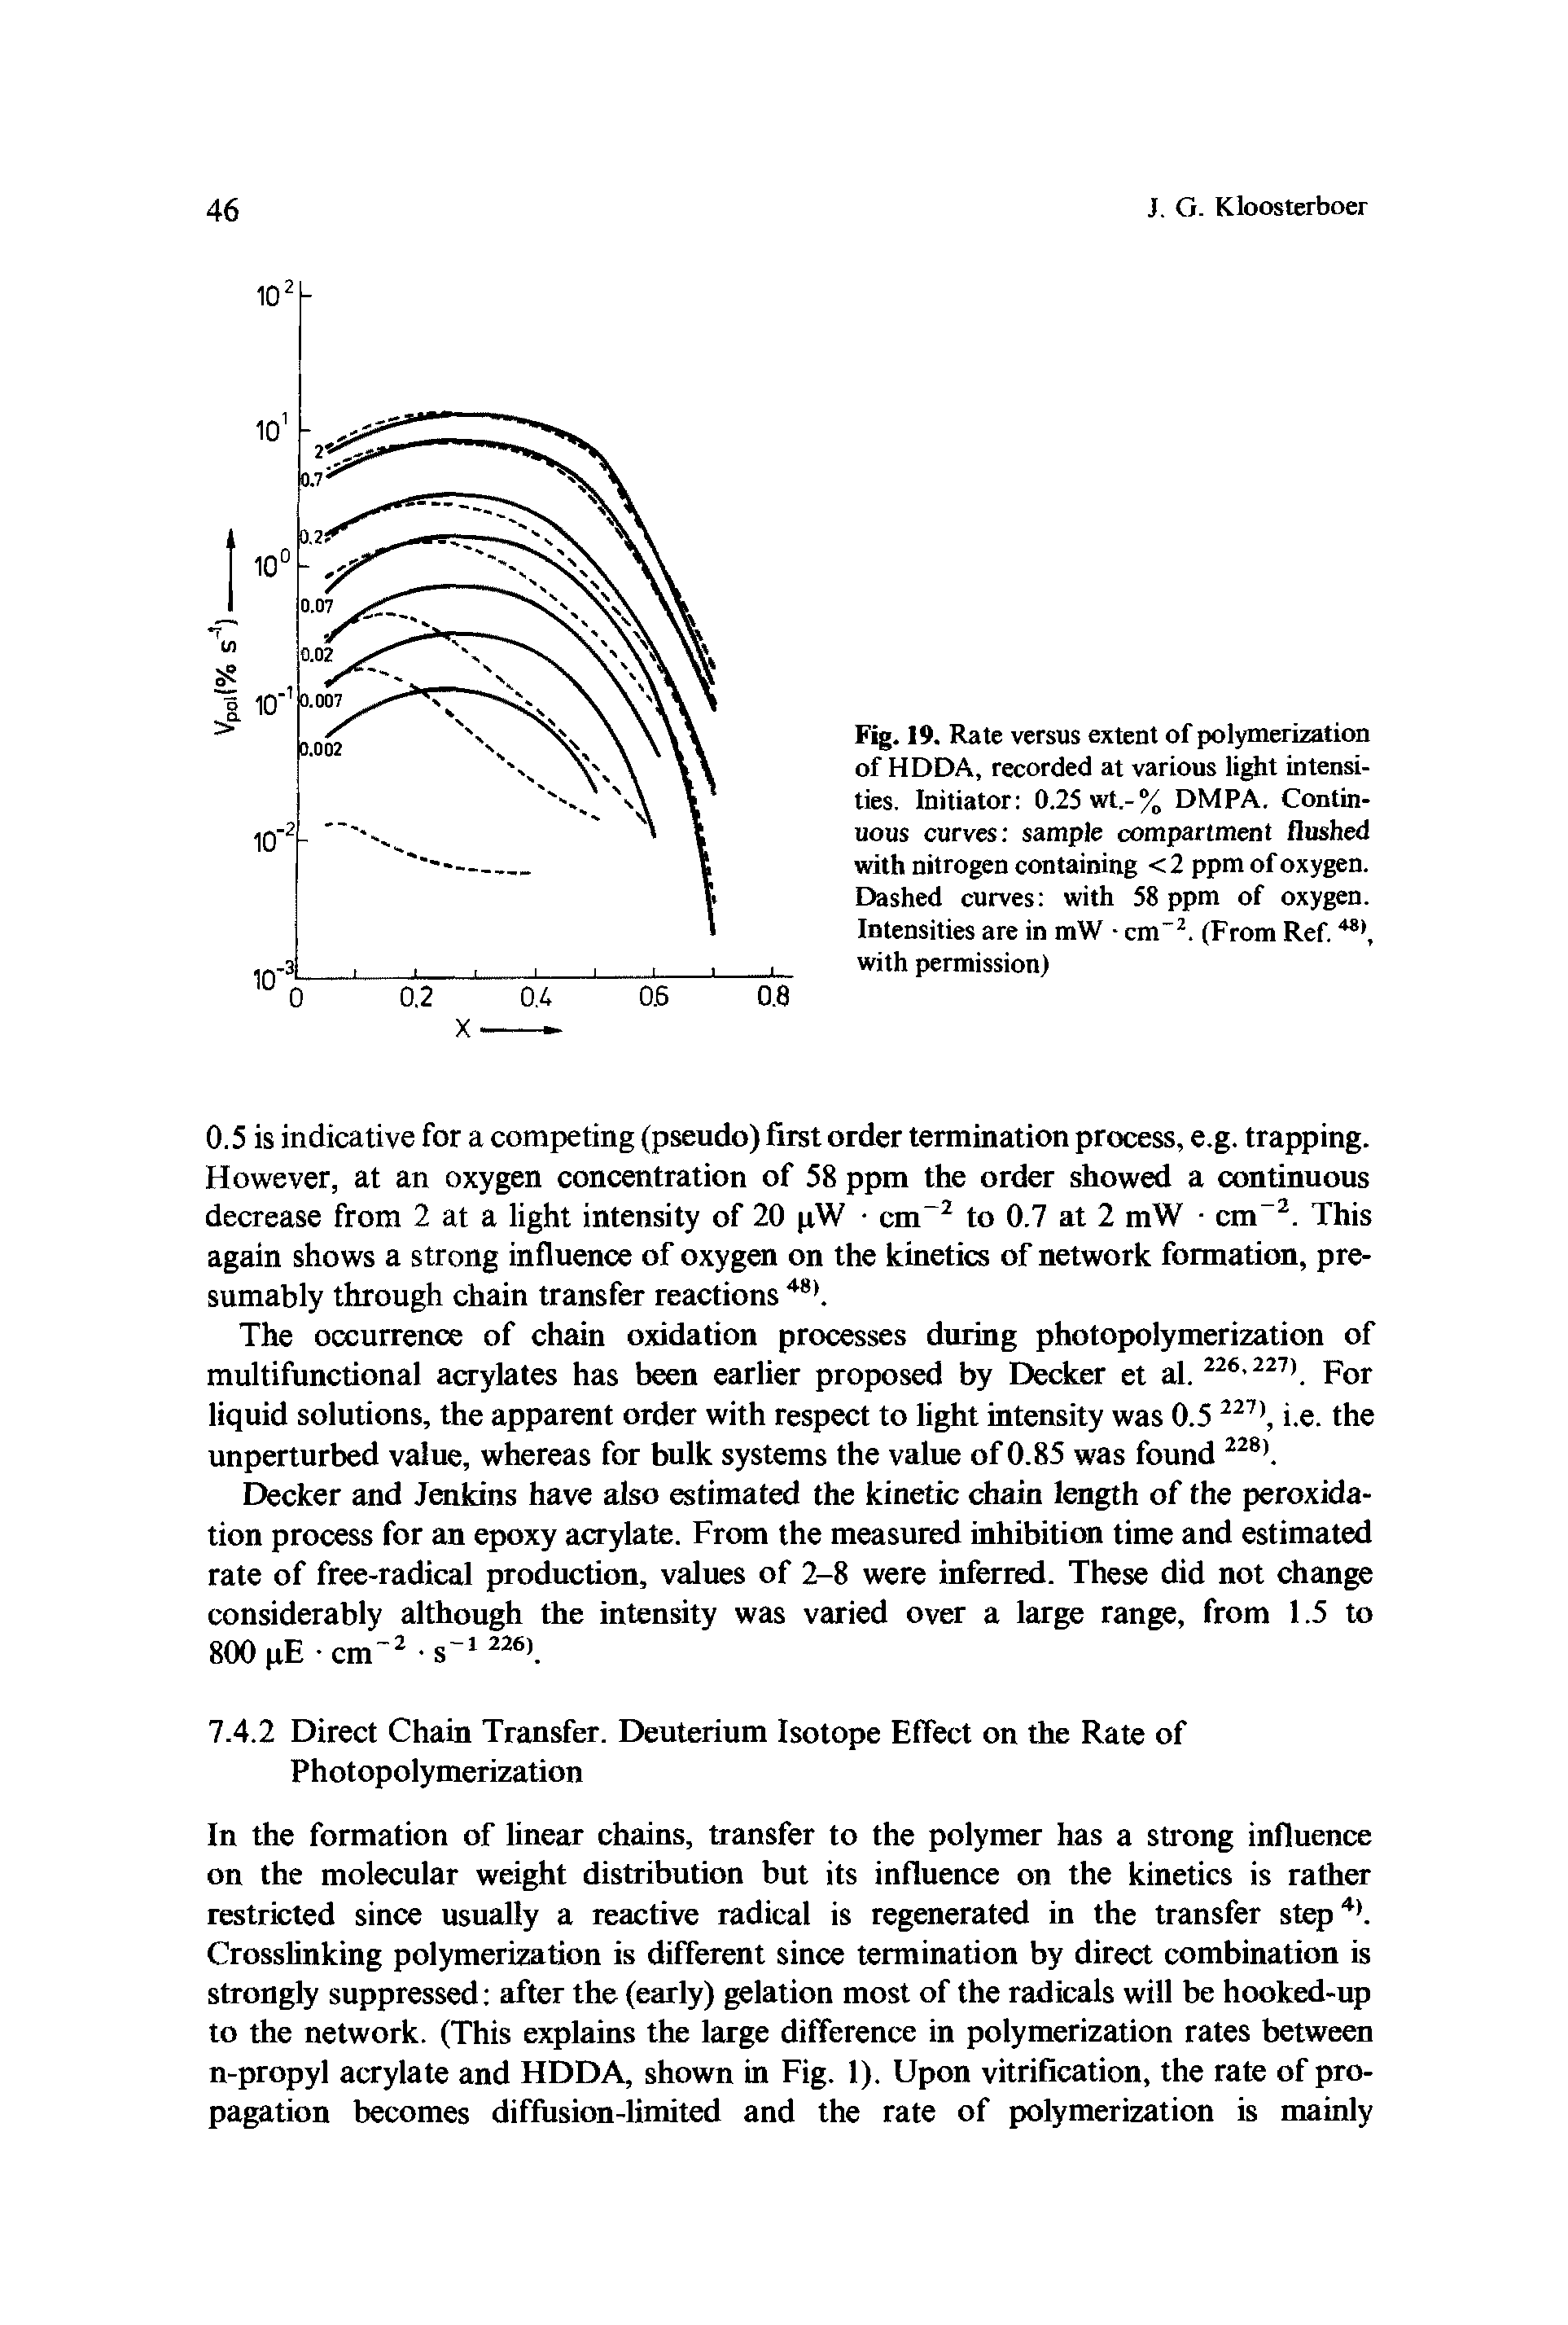 Fig. 19. Rate versus extent of polymerization of HDDA, recorded at various light intensities. Initiator 0.25wt.-% DMPA. Continuous curves sample compartment flushed with nitrogen containing <2 ppm of oxygen. Dashed curves with 58 ppm of oxygen. Intensities are in mW cm". (From Ref. with permission)...